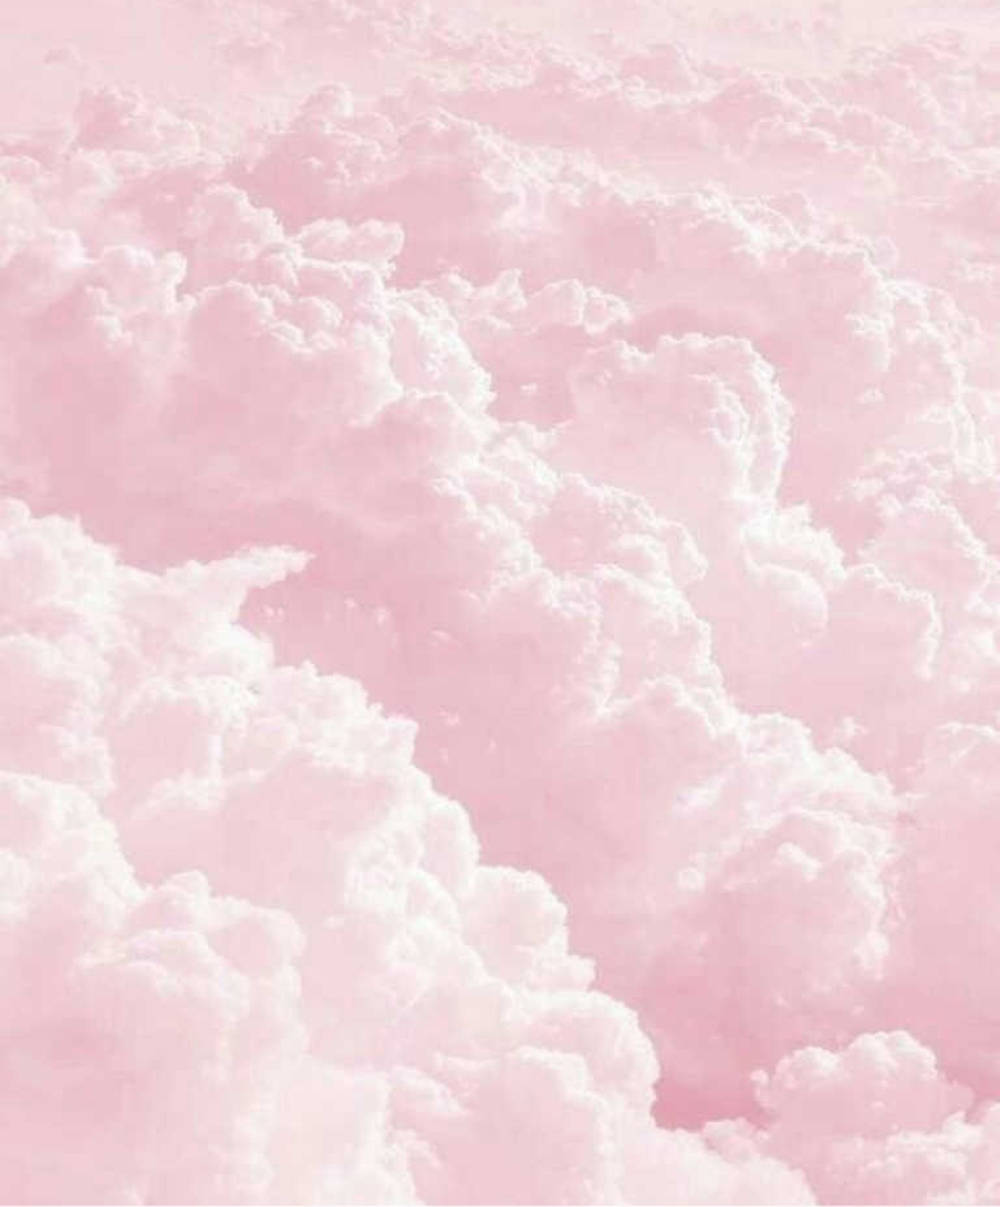 Dreamy Pastel Ipad Wallpaper With Thick Pink Clouds